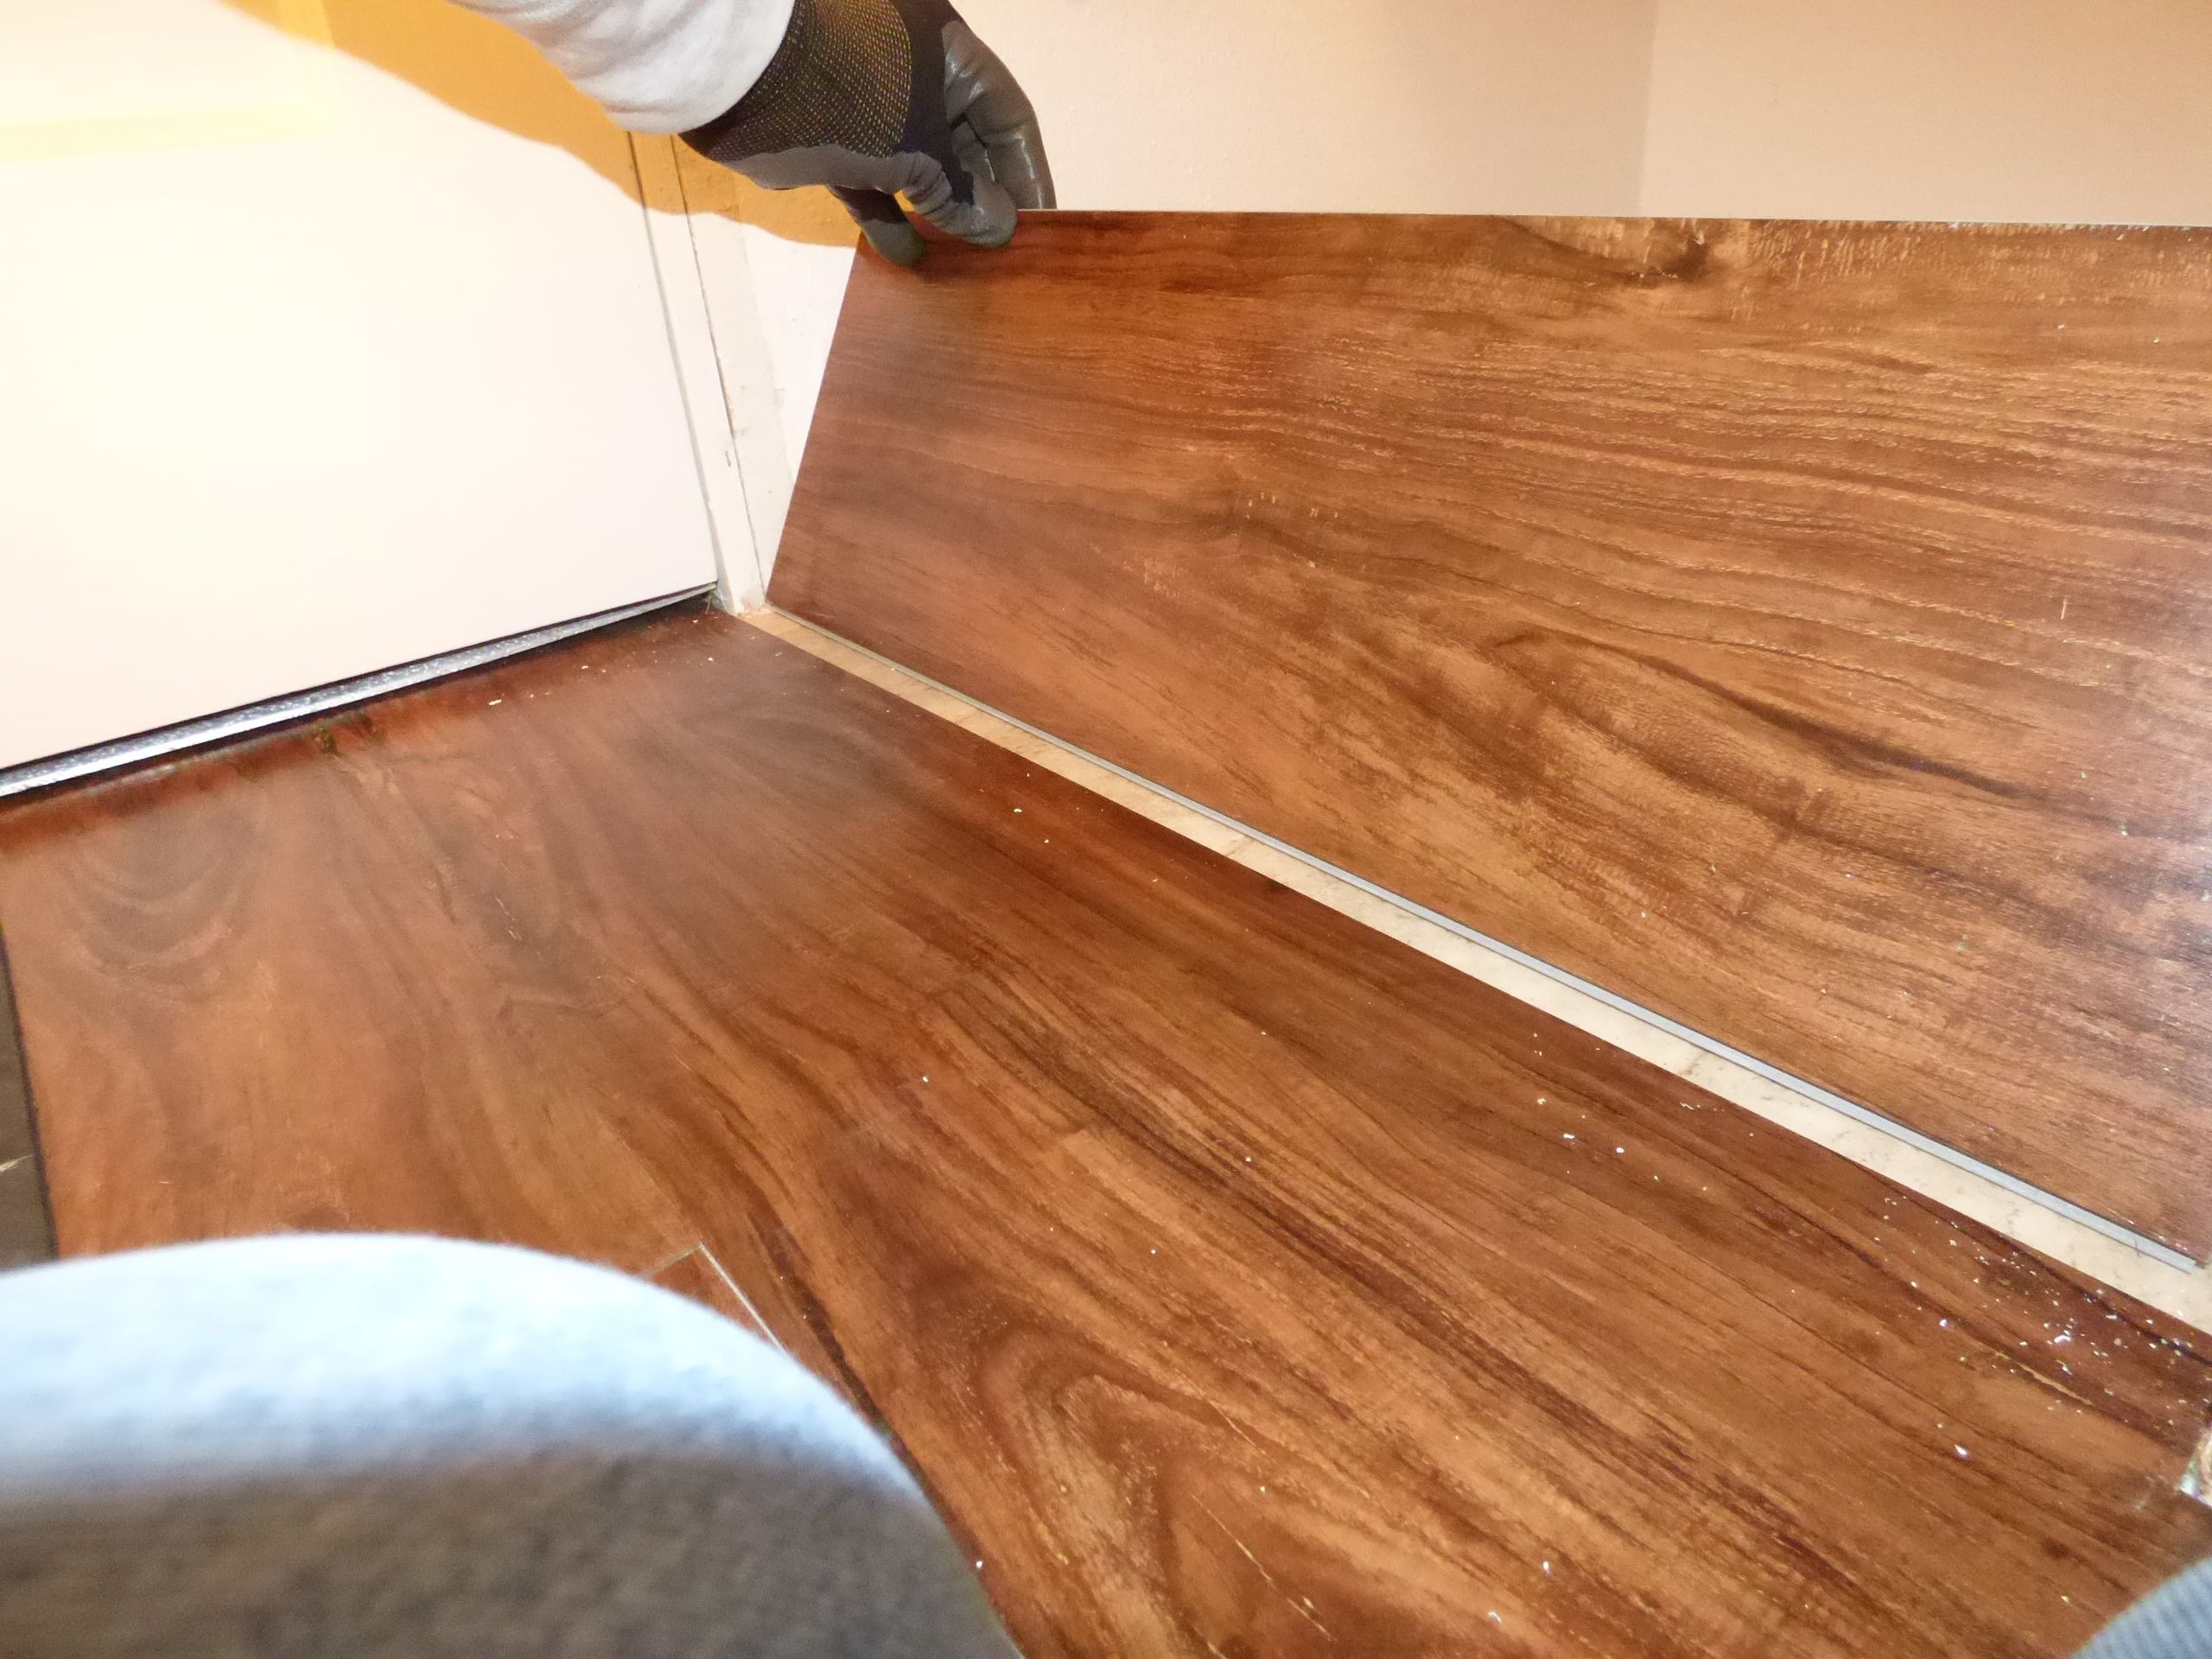 how to install hardwood floors video of its easy and fast to install plank vinyl flooring for backwards installing plank flooring 56a4a0535f9b58b7d0d7e38e jpg